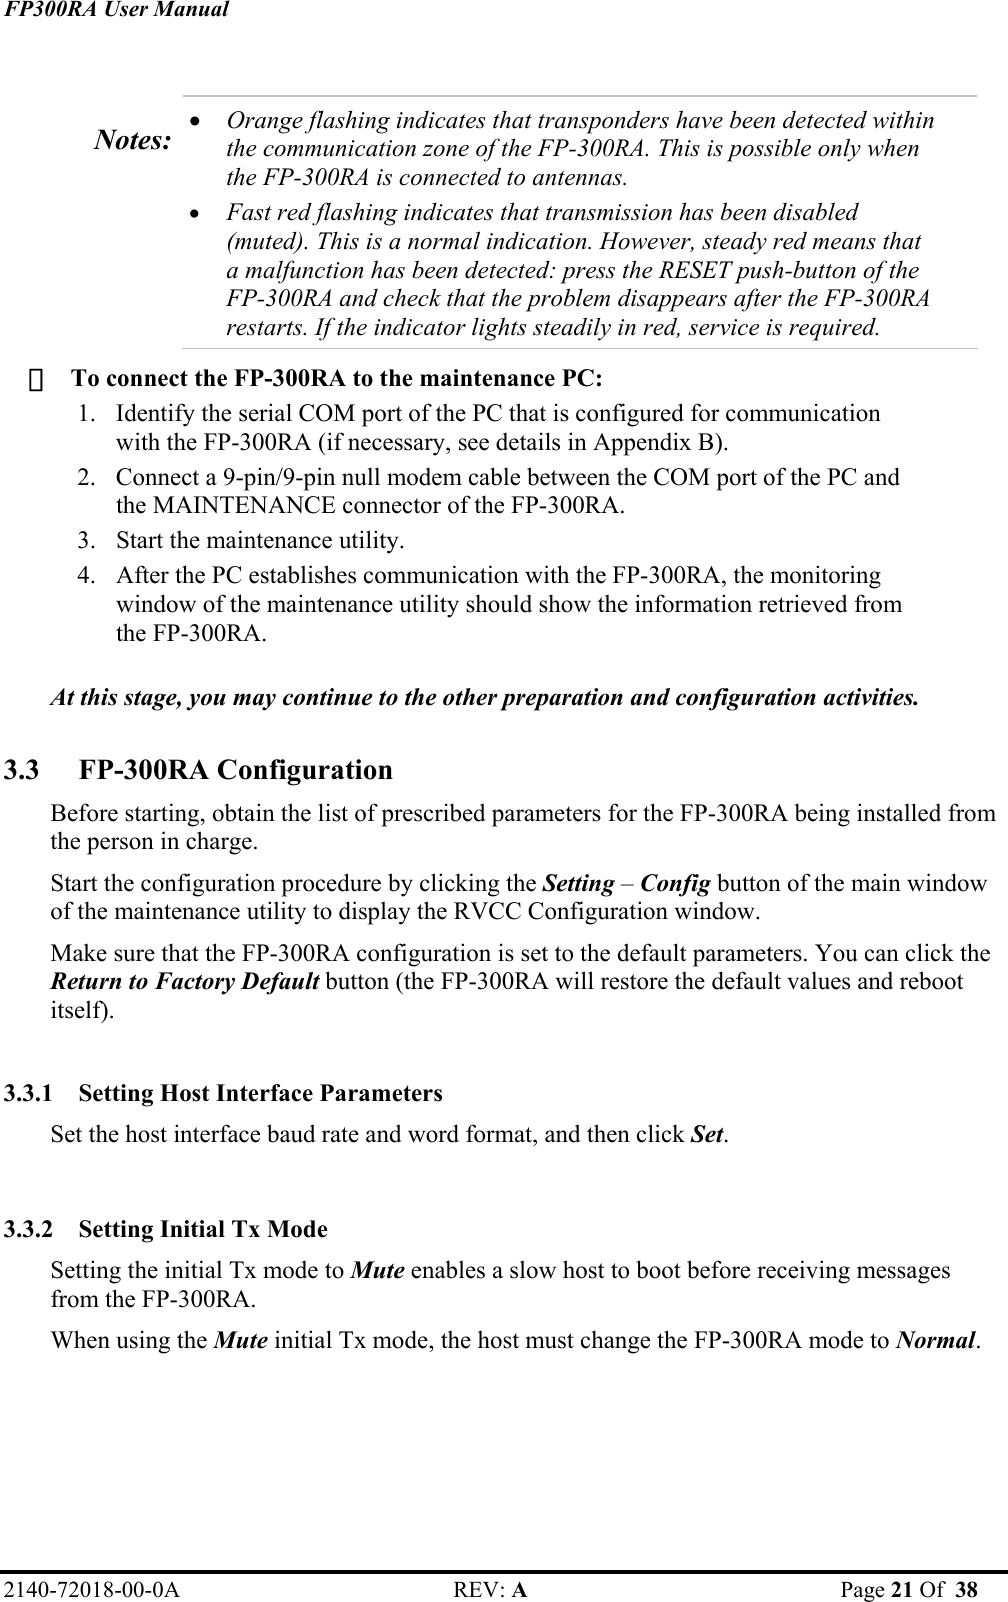 FP300RA User Manual 2140-72018-00-0A REV: A  Page 21 Of  38   Notes:  • Orange flashing indicates that transponders have been detected within the communication zone of the FP-300RA. This is possible only when the FP-300RA is connected to antennas. • Fast red flashing indicates that transmission has been disabled (muted). This is a normal indication. However, steady red means that a malfunction has been detected: press the RESET push-button of the FP-300RA and check that the problem disappears after the FP-300RA restarts. If the indicator lights steadily in red, service is required.    To connect the FP-300RA to the maintenance PC: 1. Identify the serial COM port of the PC that is configured for communication with the FP-300RA (if necessary, see details in Appendix B).  2. Connect a 9-pin/9-pin null modem cable between the COM port of the PC and the MAINTENANCE connector of the FP-300RA. 3. Start the maintenance utility. 4. After the PC establishes communication with the FP-300RA, the monitoring window of the maintenance utility should show the information retrieved from the FP-300RA.   At this stage, you may continue to the other preparation and configuration activities.  3.3 FP-300RA Configuration  Before starting, obtain the list of prescribed parameters for the FP-300RA being installed from the person in charge. Start the configuration procedure by clicking the Setting – Config button of the main window of the maintenance utility to display the RVCC Configuration window. Make sure that the FP-300RA configuration is set to the default parameters. You can click the Return to Factory Default button (the FP-300RA will restore the default values and reboot itself).  3.3.1 Setting Host Interface Parameters  Set the host interface baud rate and word format, and then click Set.  3.3.2 Setting Initial Tx Mode  Setting the initial Tx mode to Mute enables a slow host to boot before receiving messages from the FP-300RA.  When using the Mute initial Tx mode, the host must change the FP-300RA mode to Normal.  